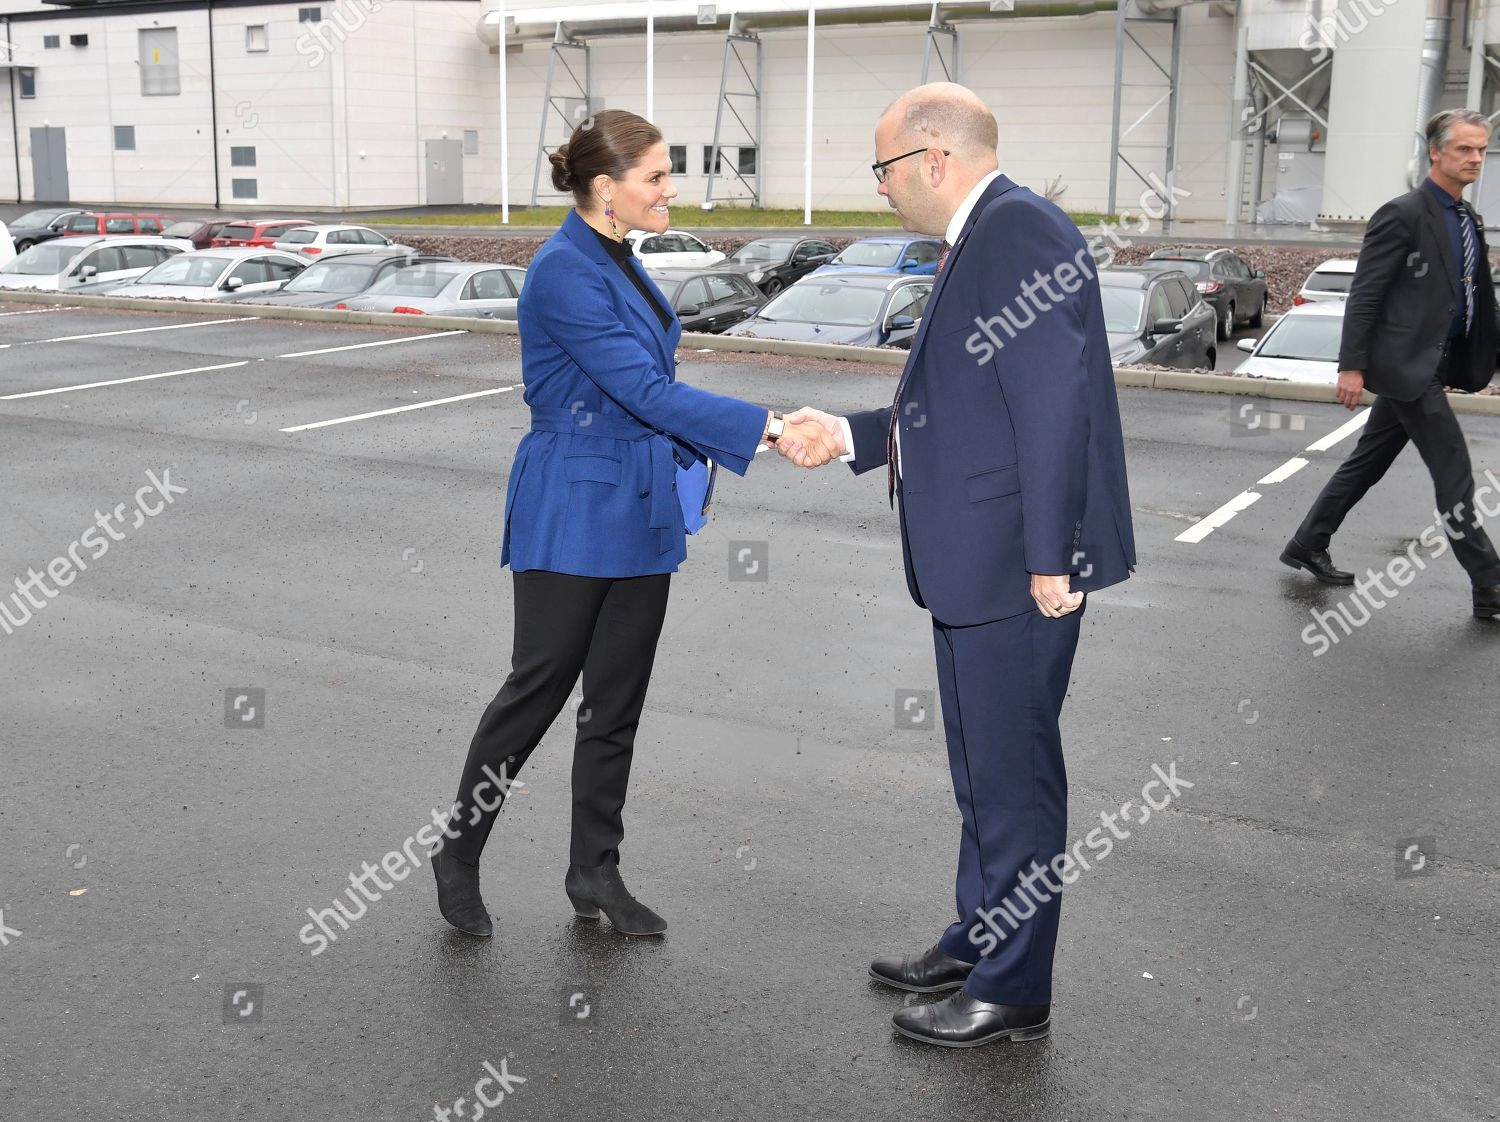 crown-princess-victoria-visits-the-swedish-plastic-recycling-plant-motala-sweden-shutterstock-editorial-10448317g.jpg